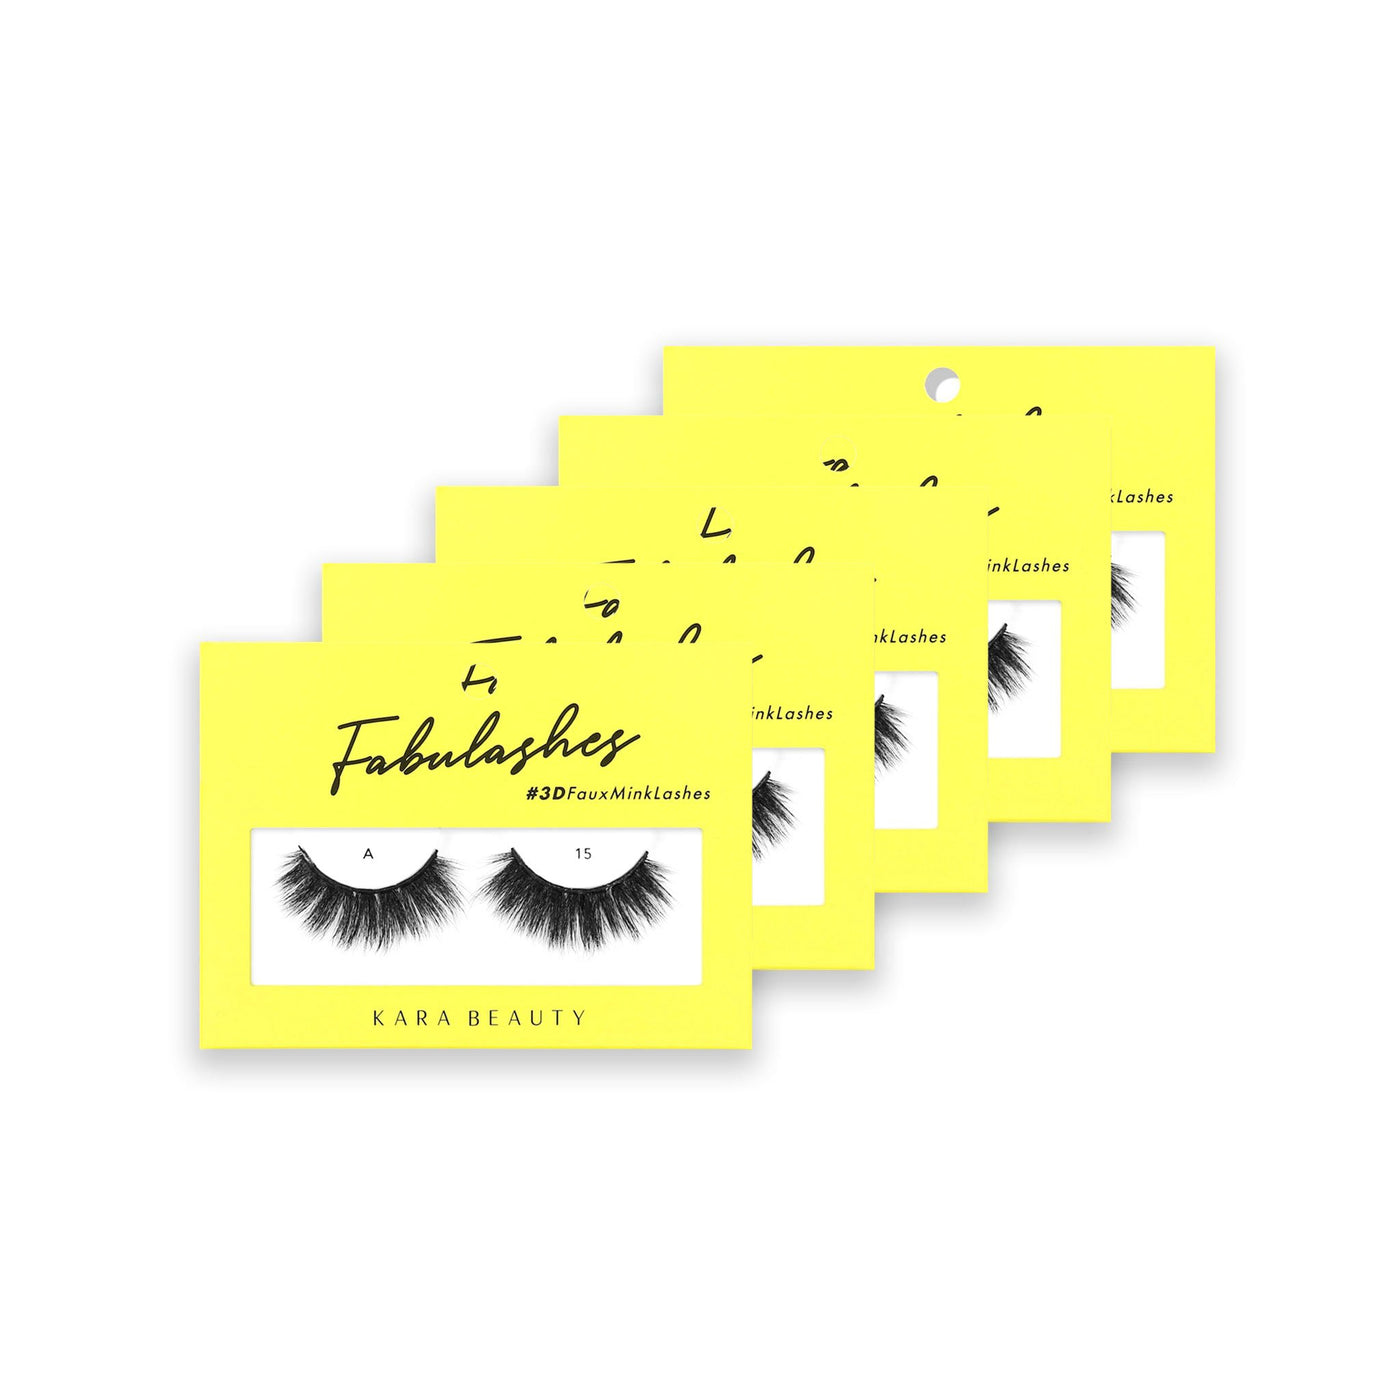 Style A15 Fabulashes 3D faux mink strip eyelashes 5 pack